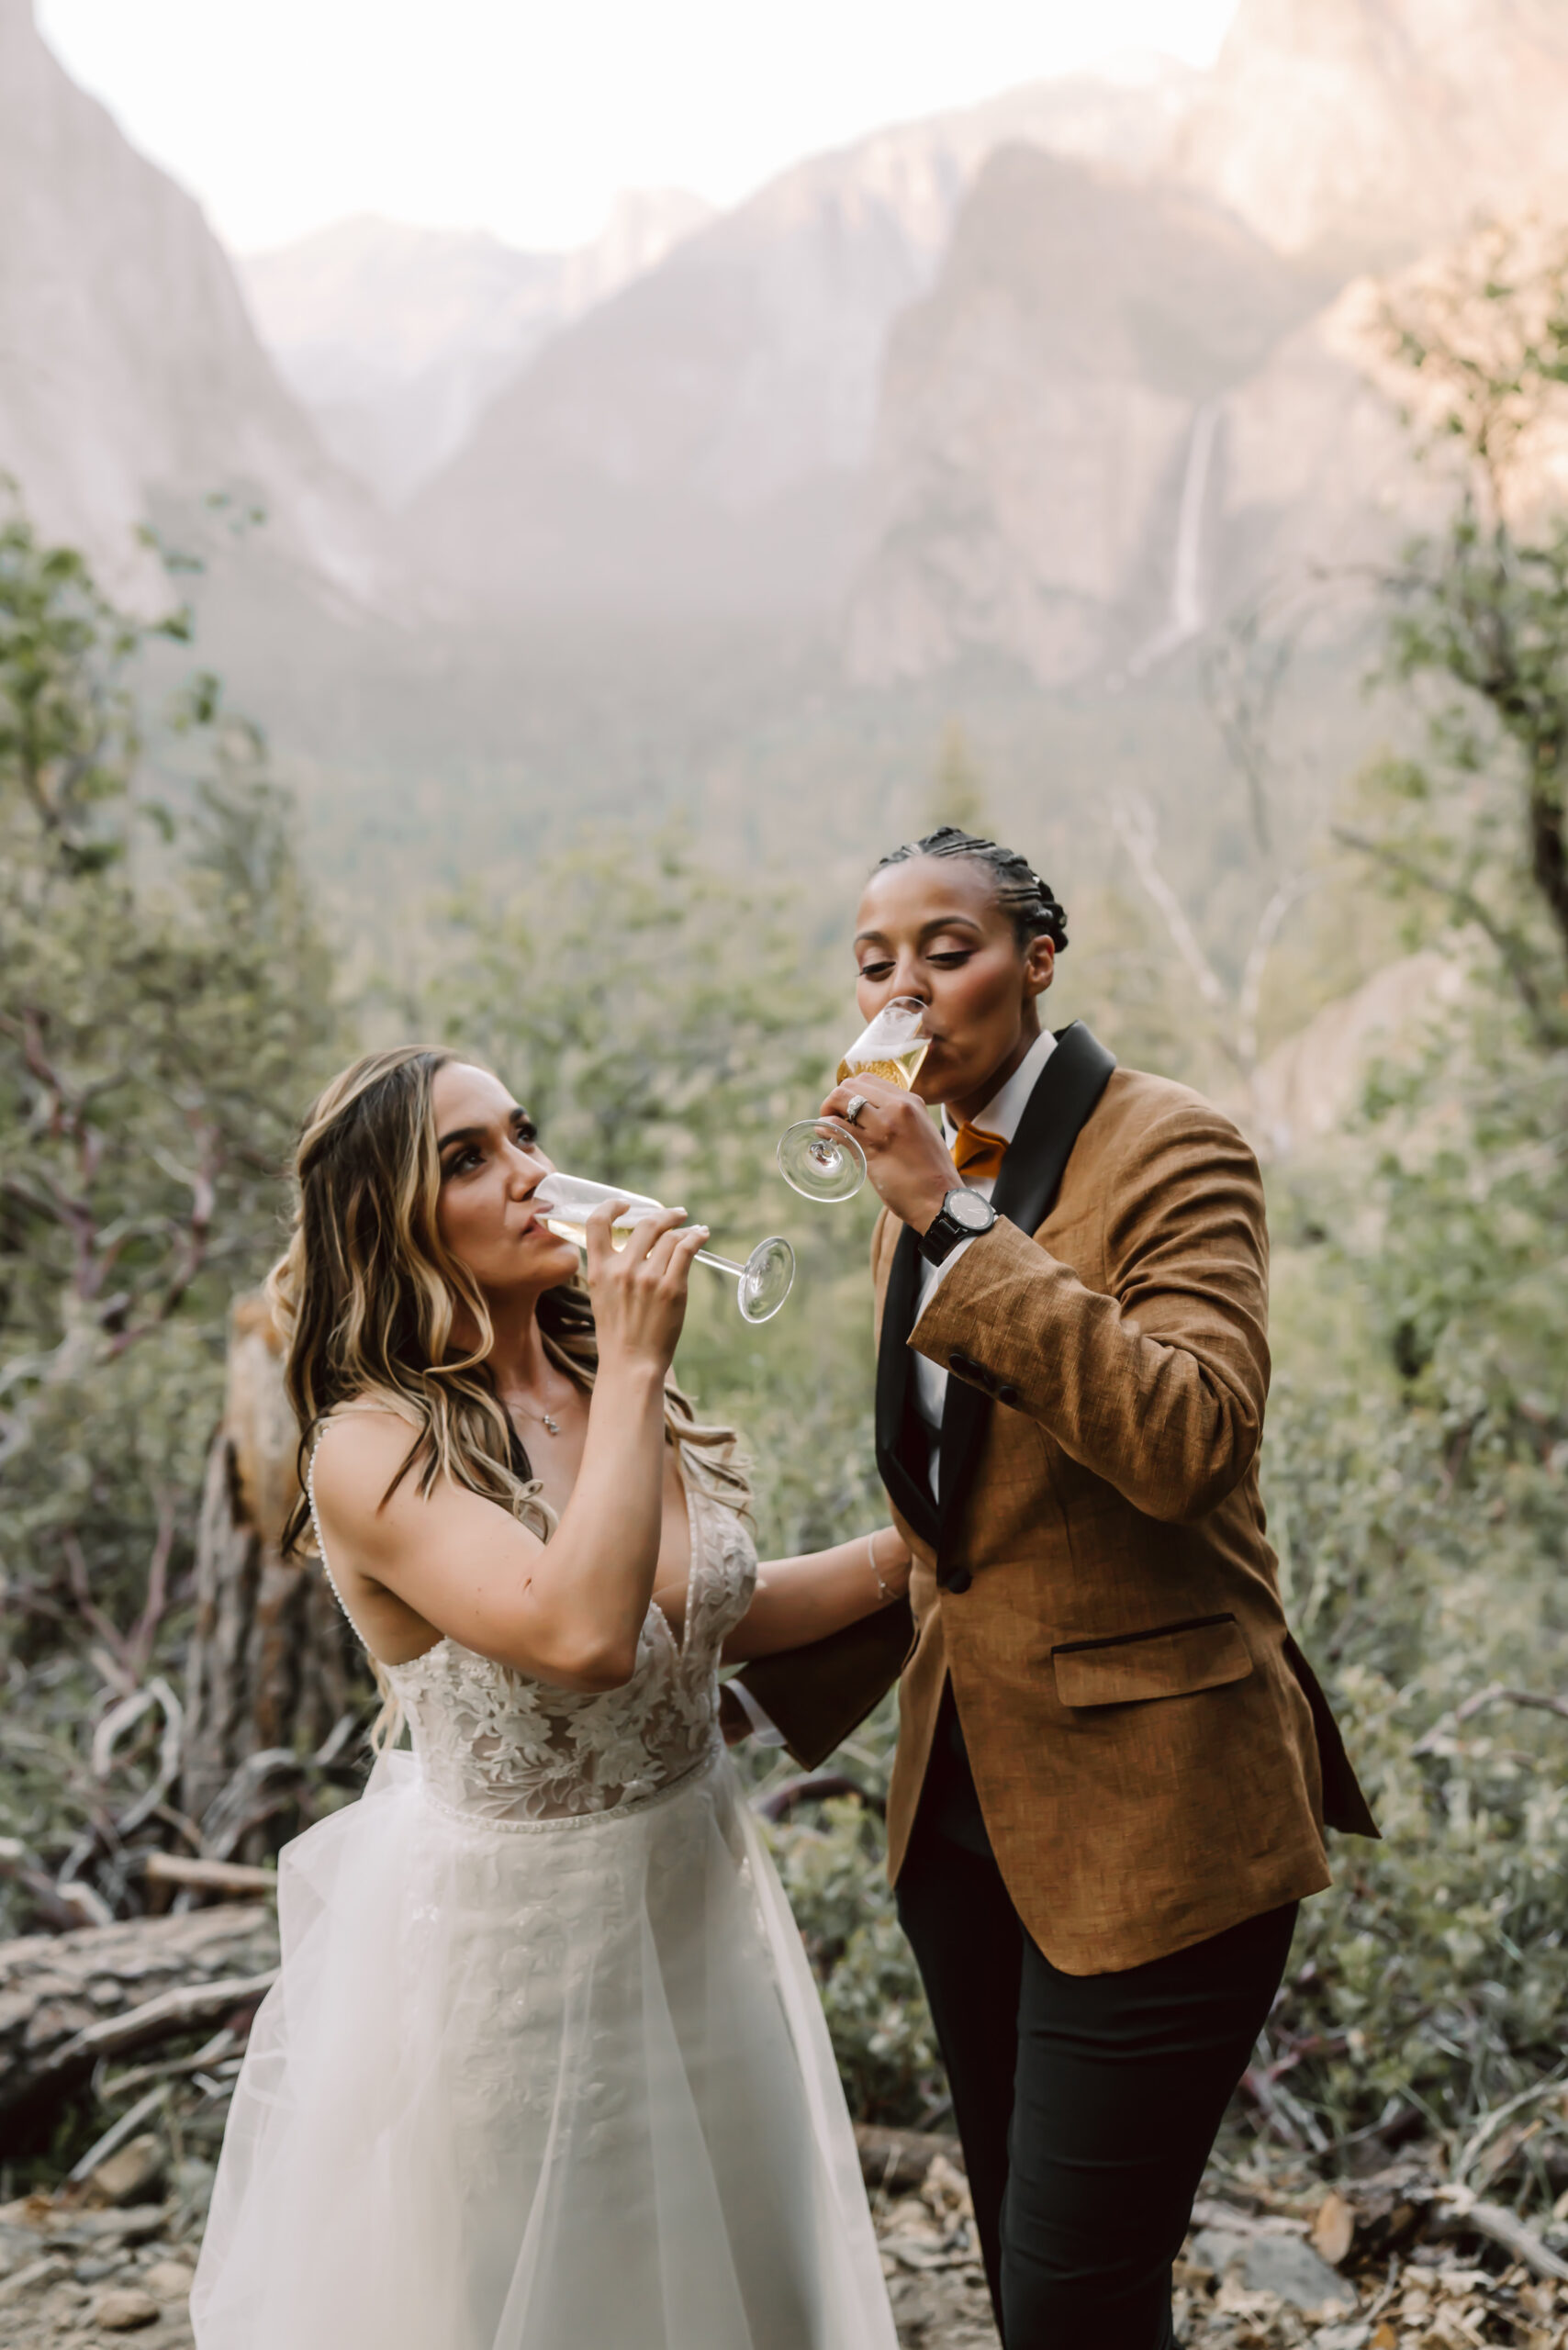 Two brides toasting on their elopement day in front of the mountain backdrop location